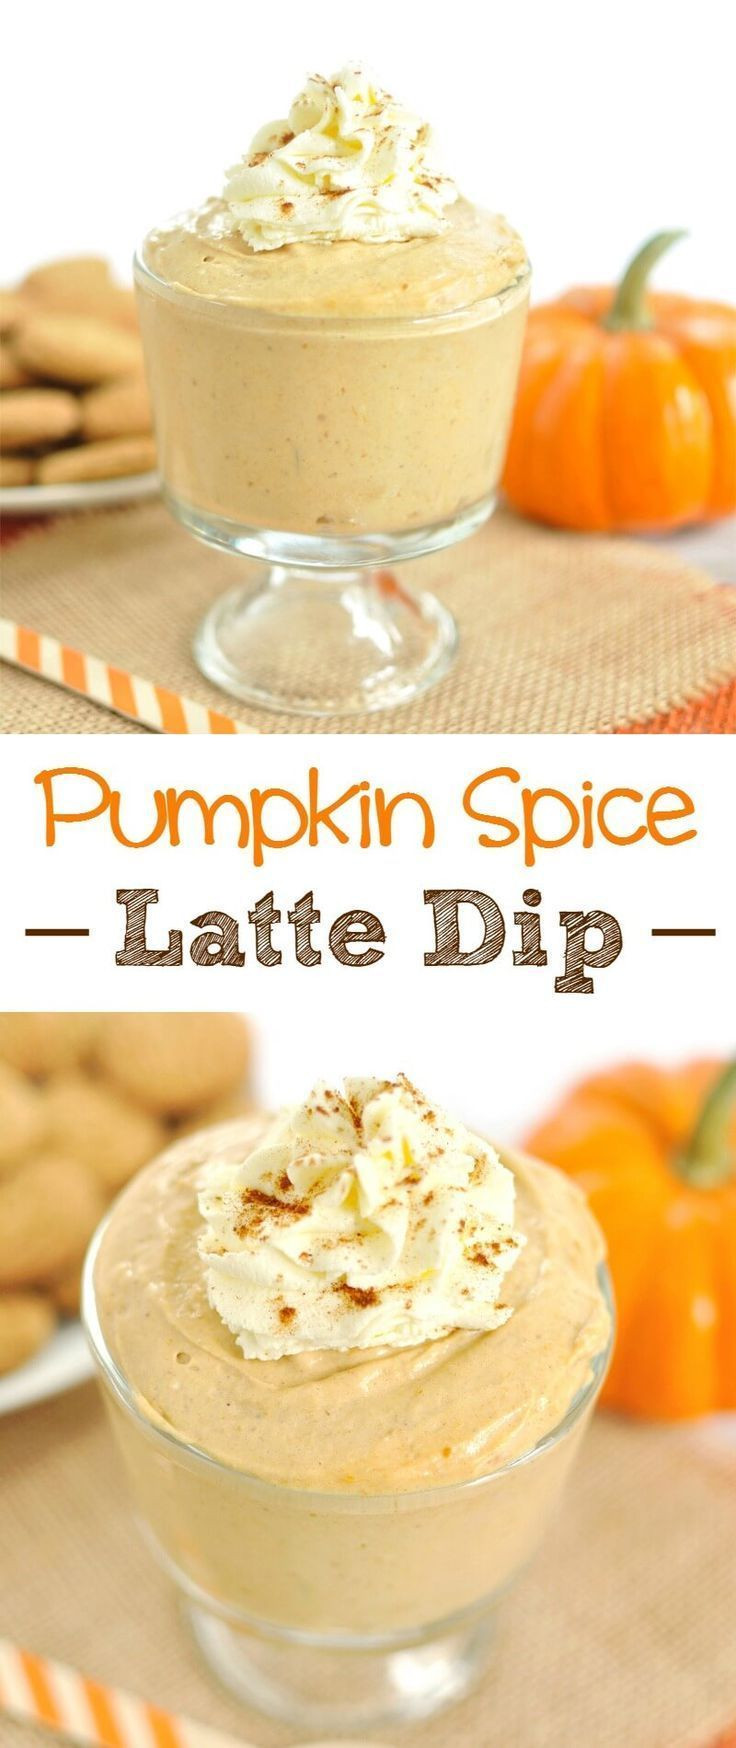 Fall Flavors For Desserts
 All the flavors of a pumpkin spice latte into a festive